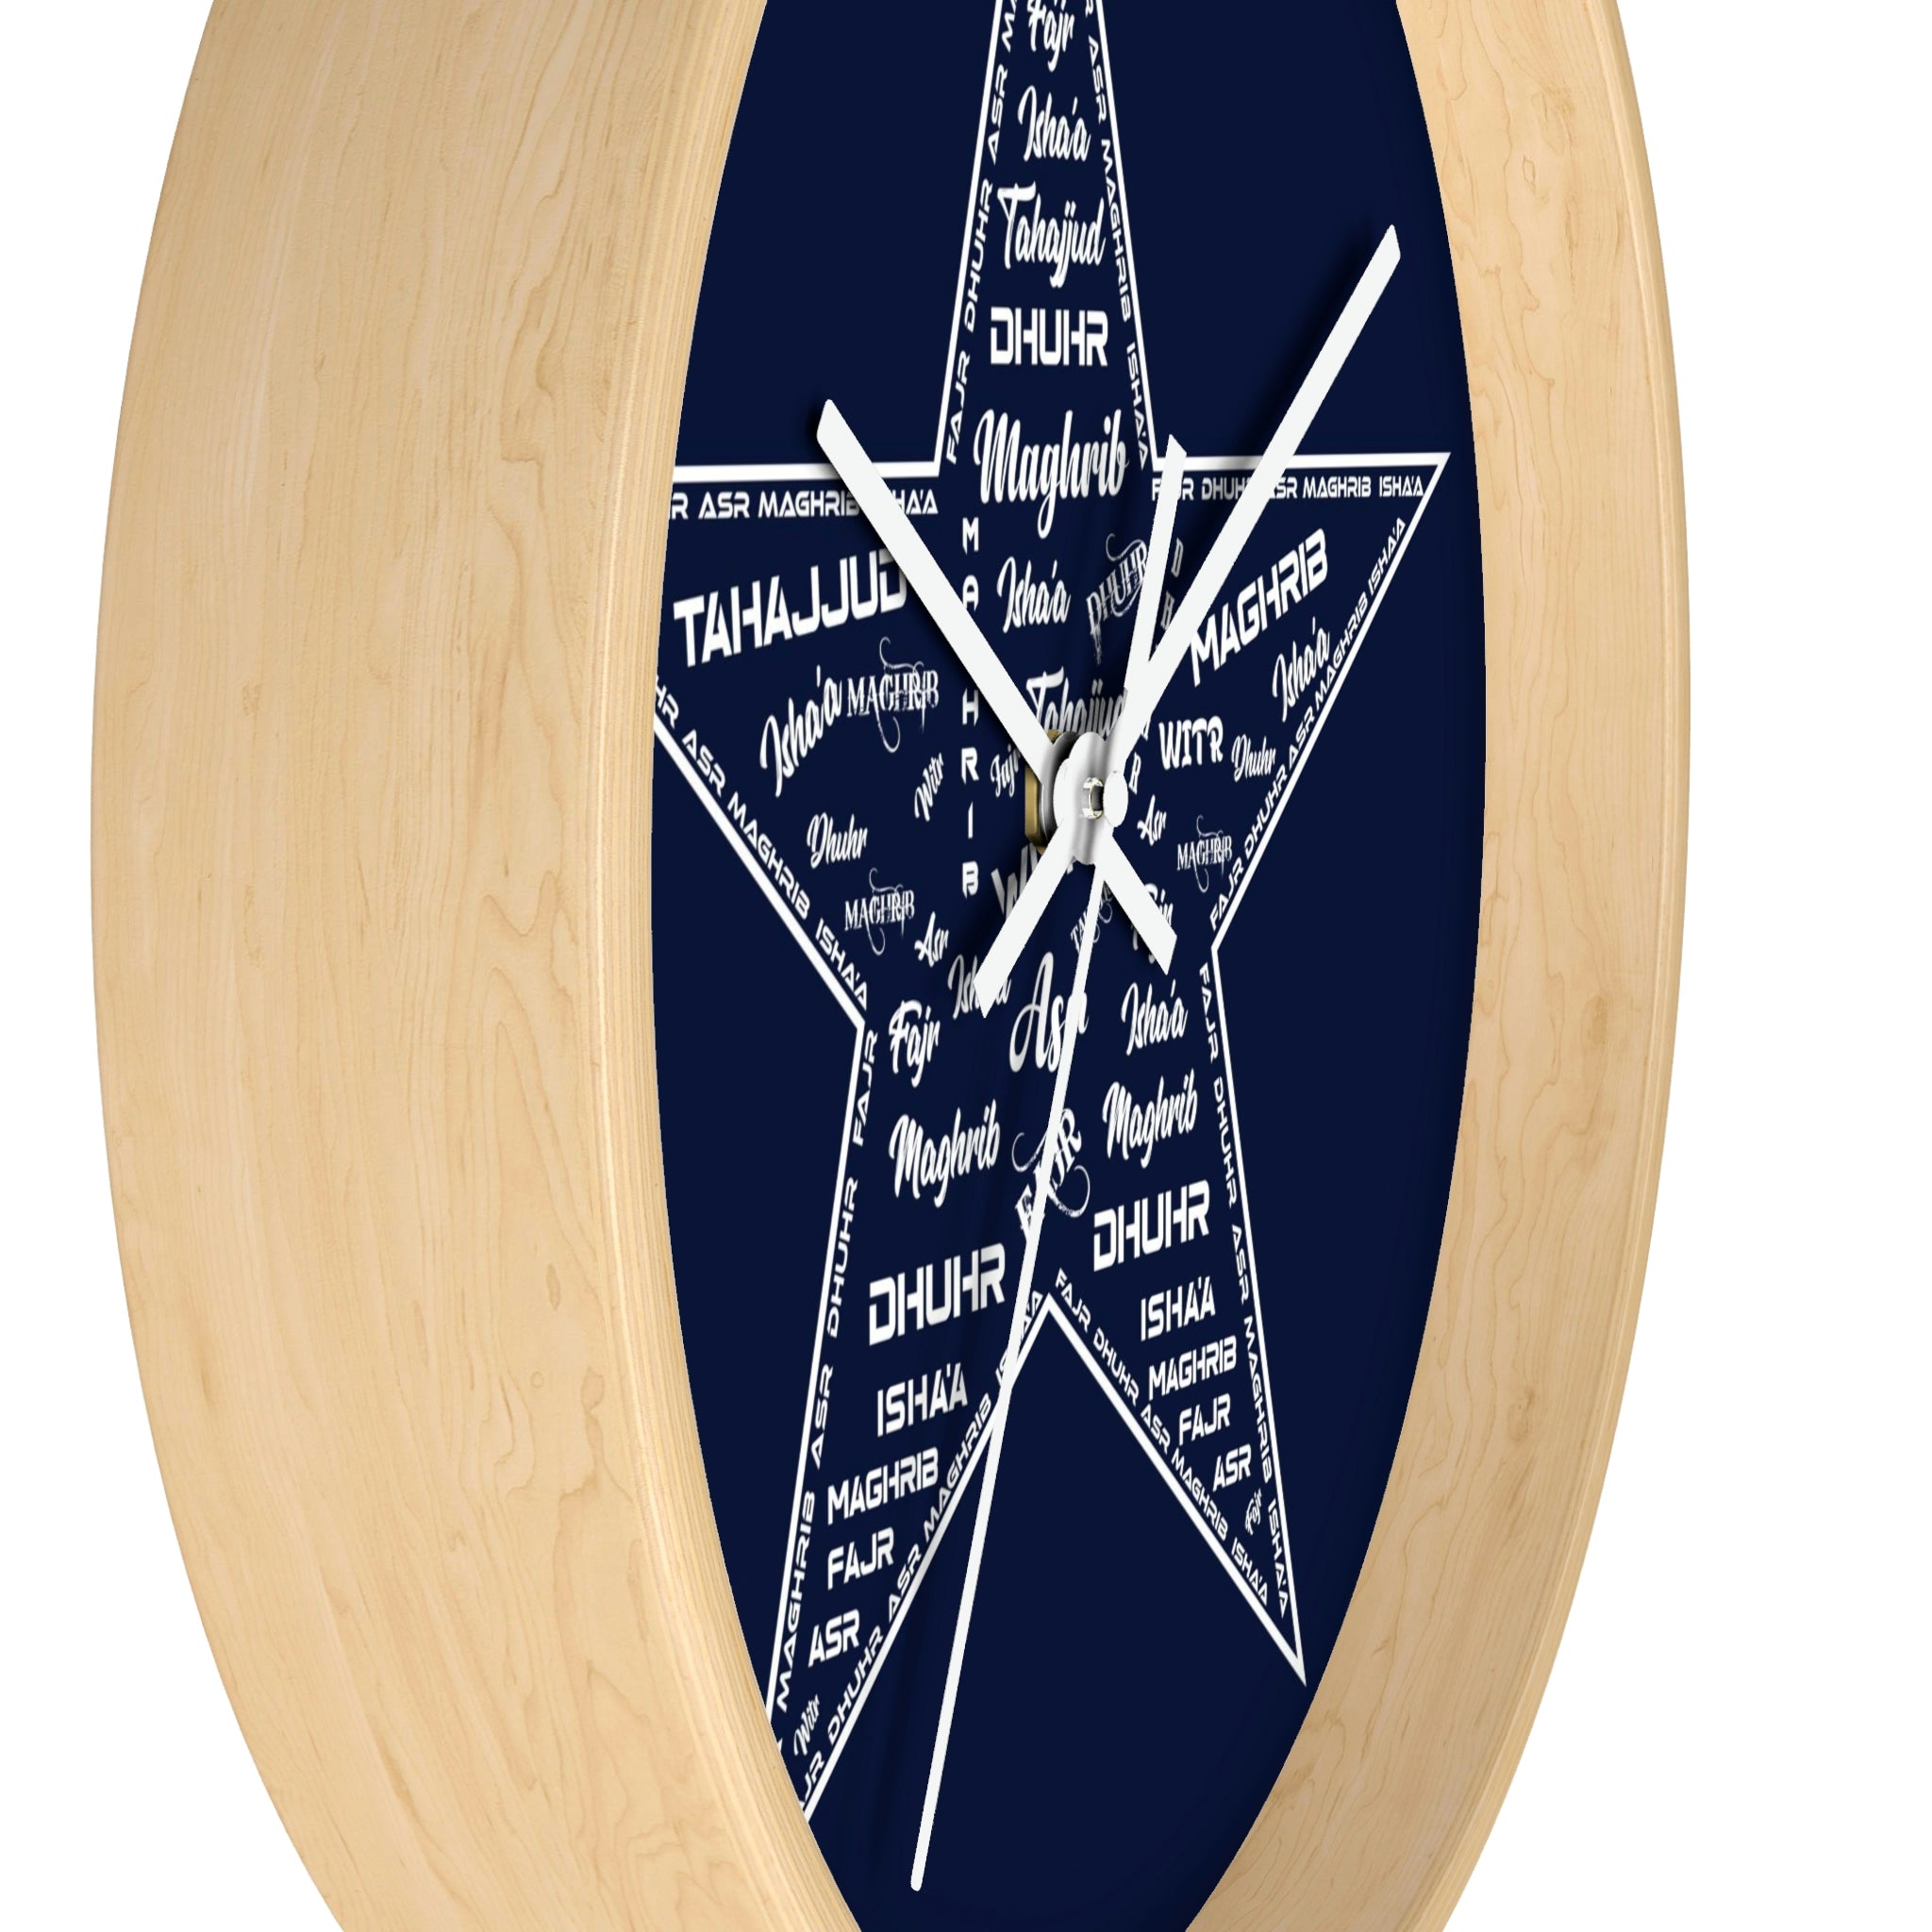 Islamic Prayers Wall Clock (Please email me if you'd like to request something personalized)